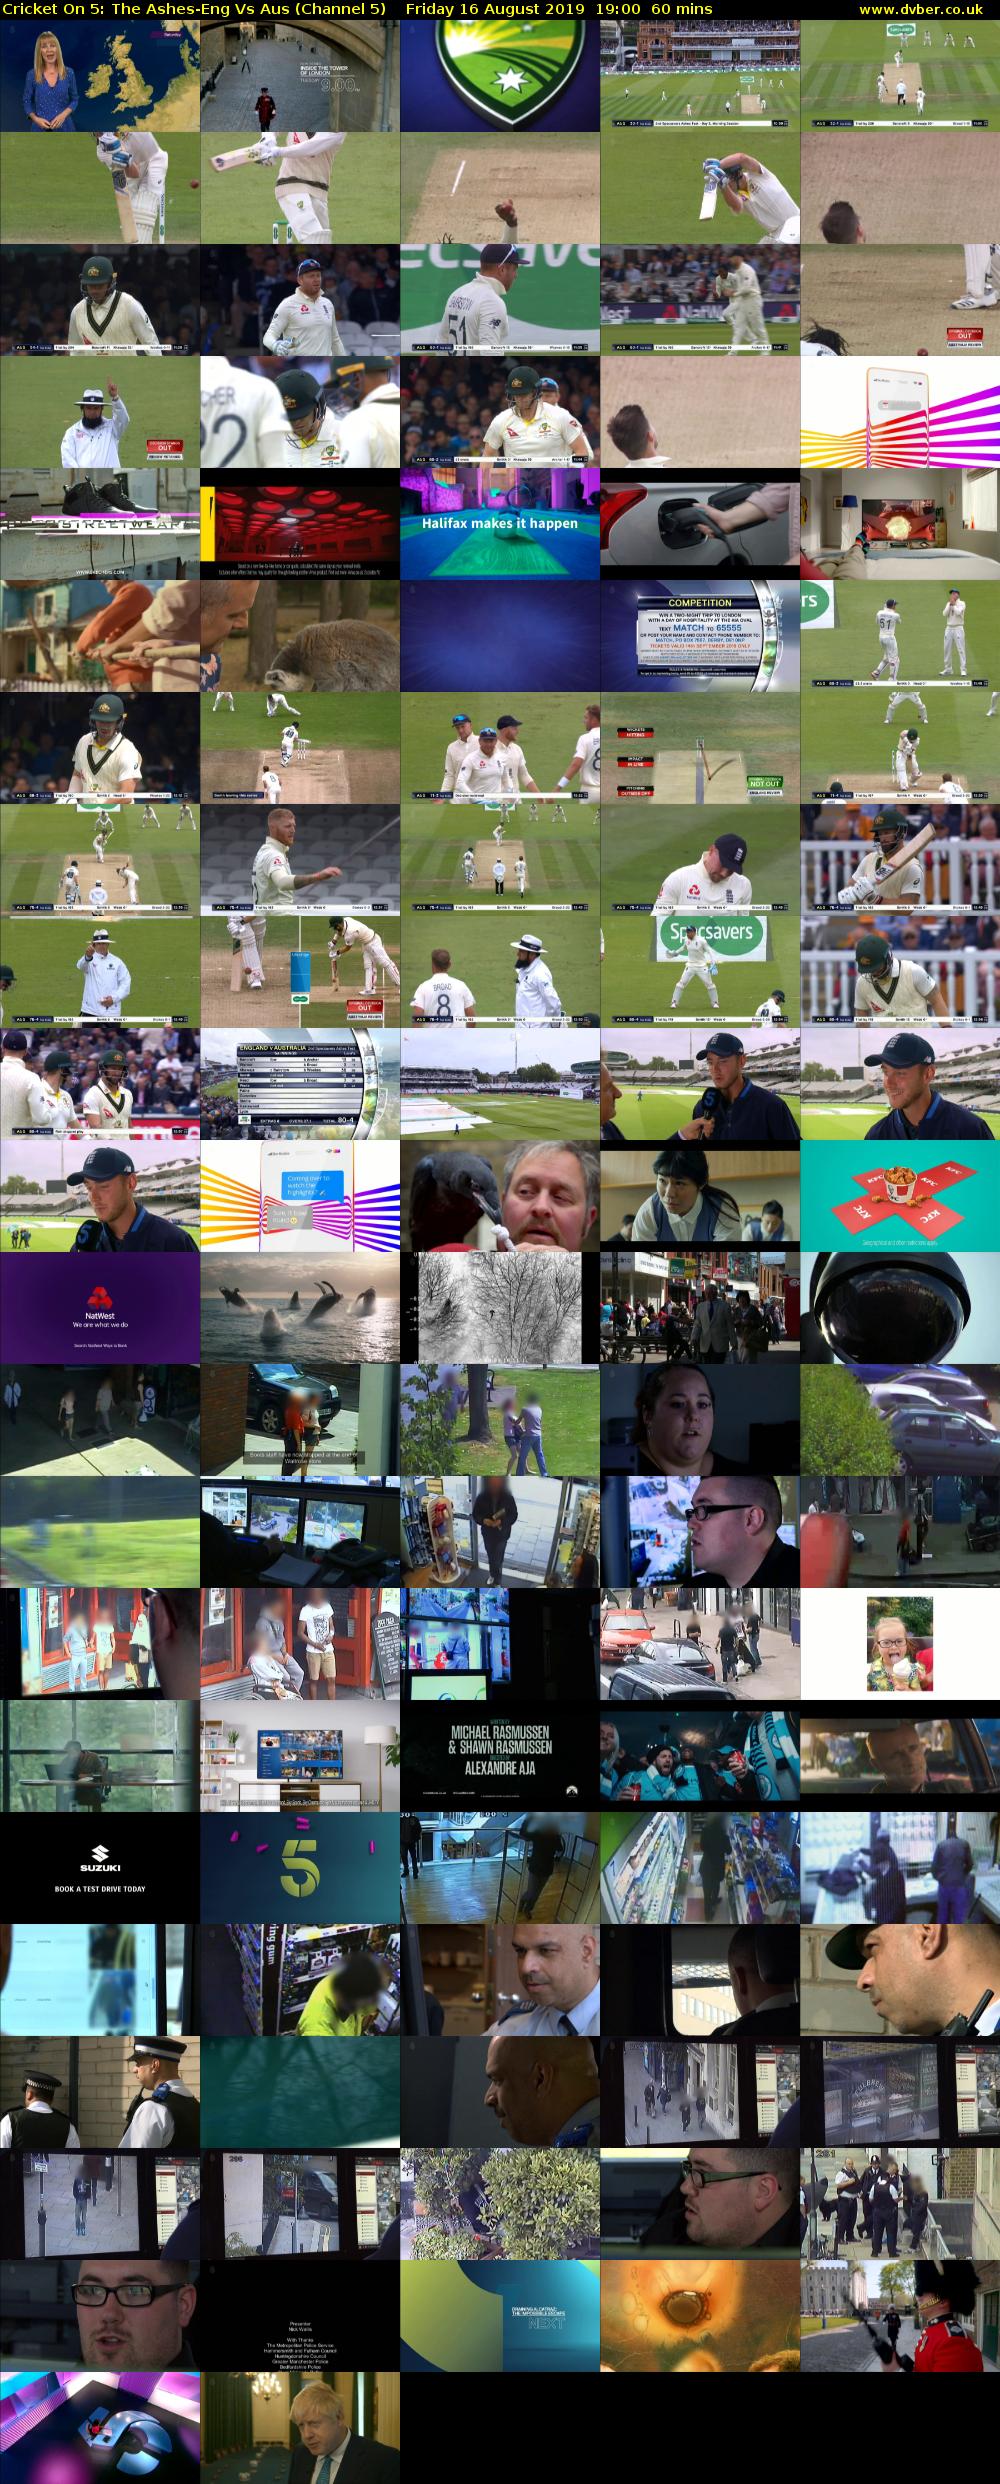 Cricket On 5: The Ashes-Eng Vs Aus (Channel 5) Friday 16 August 2019 19:00 - 20:00